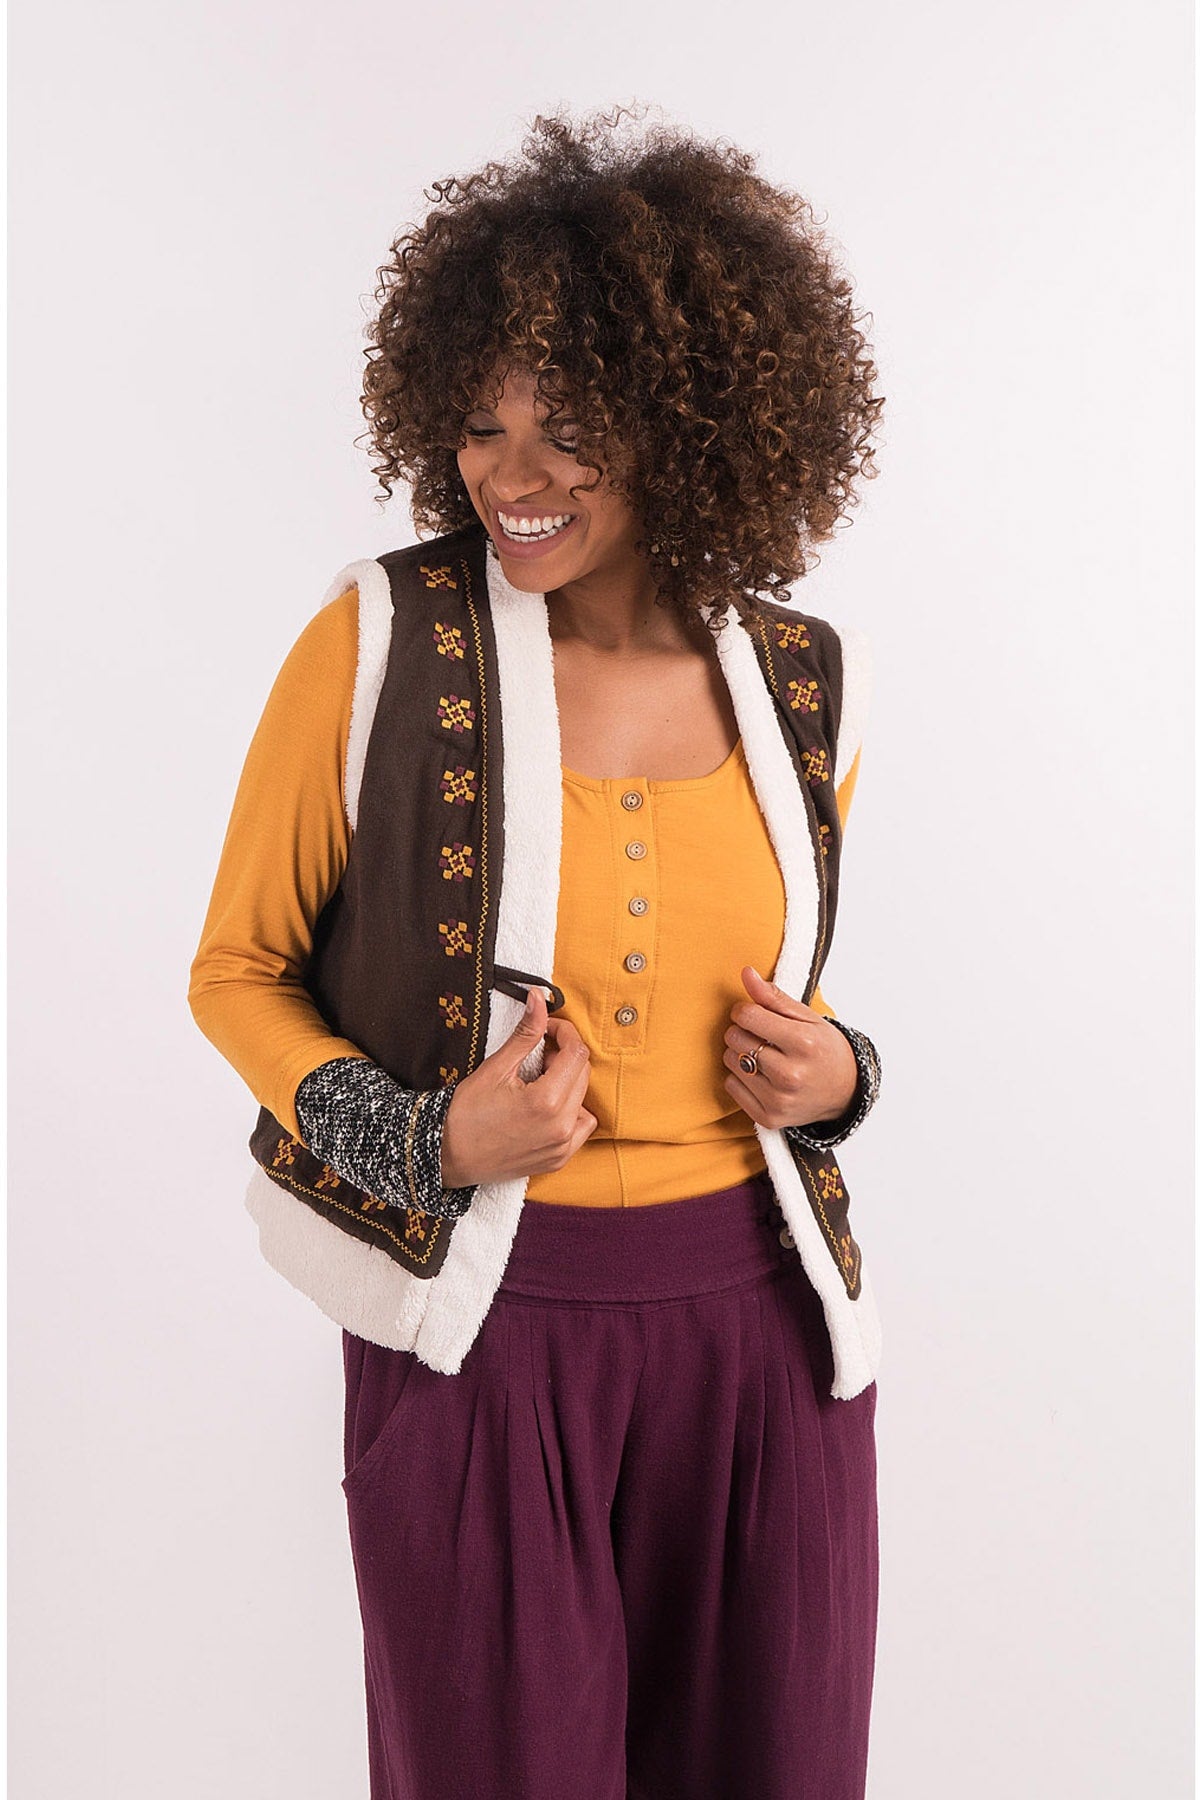 Brown Embroidered Vest